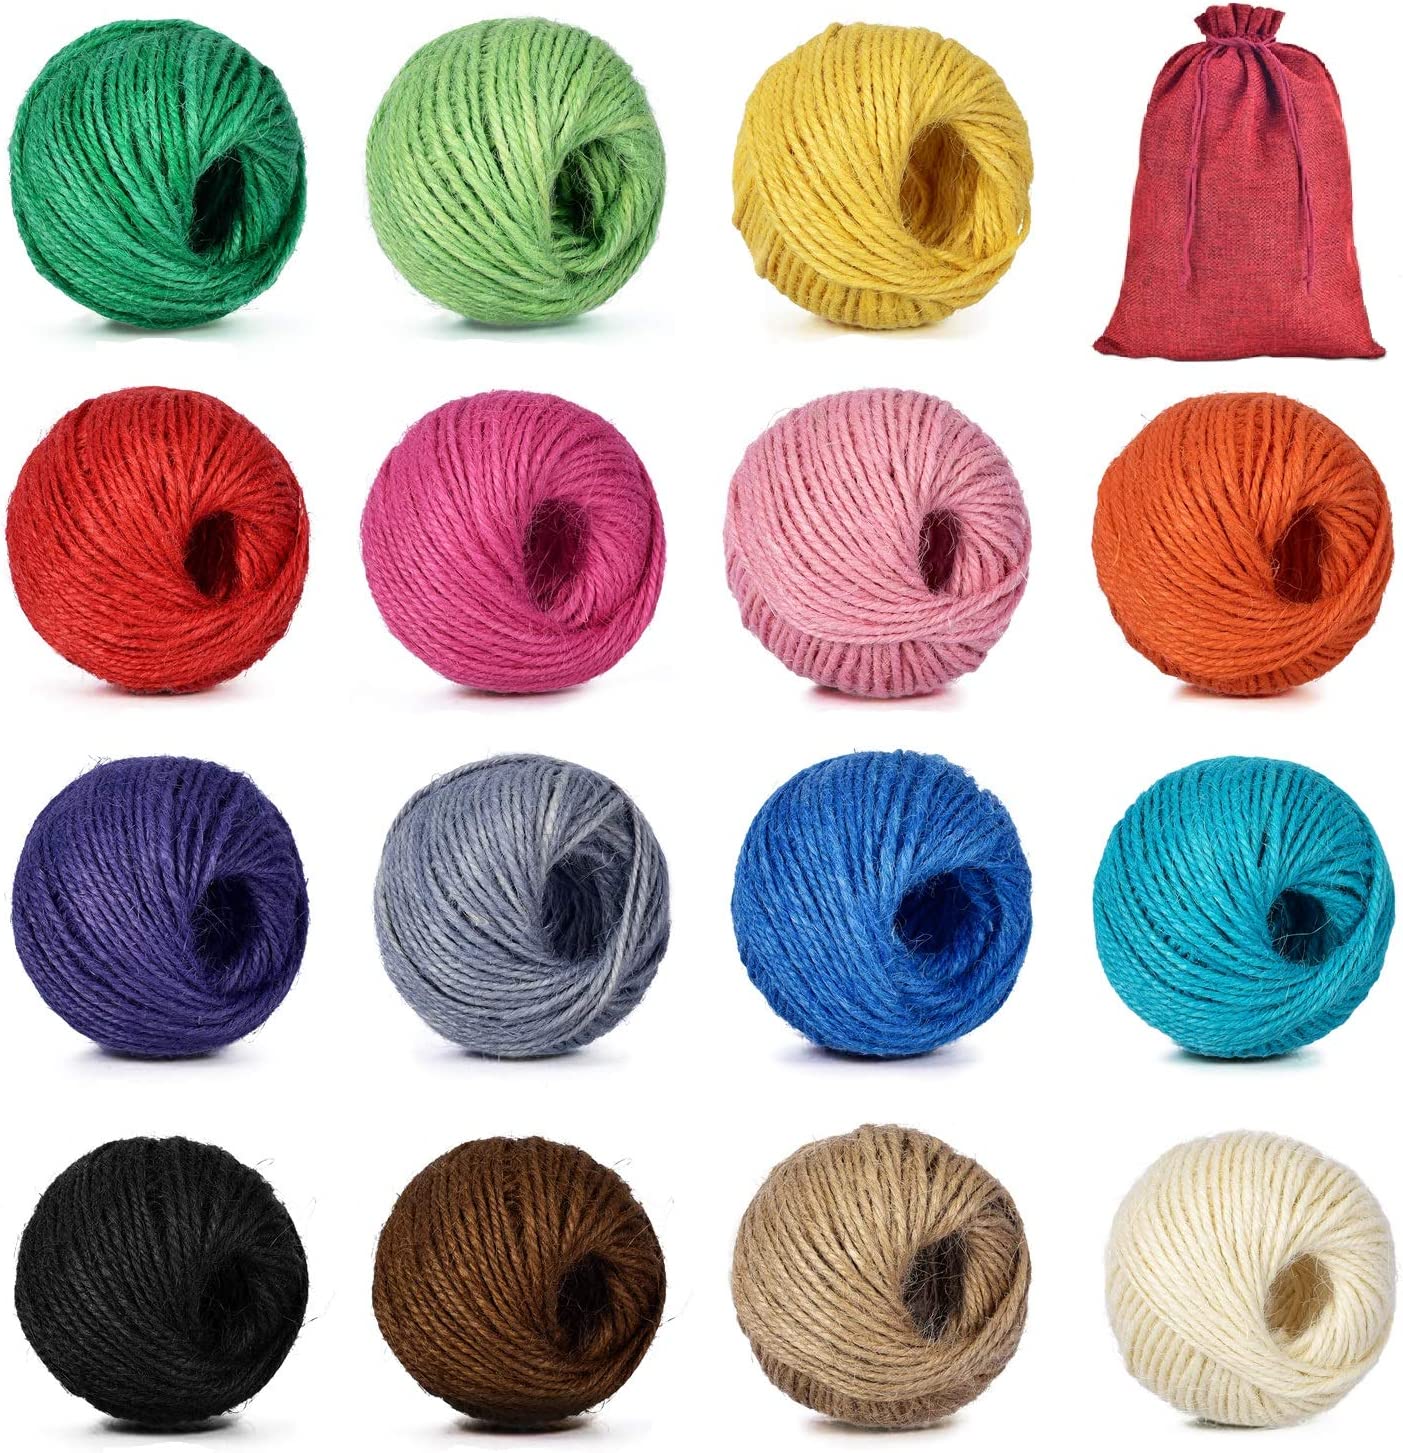 Natural Hemp Colored String Colorful 12 Variety Pack; Beautiful Twine for Arts Crafts 32ft per Color